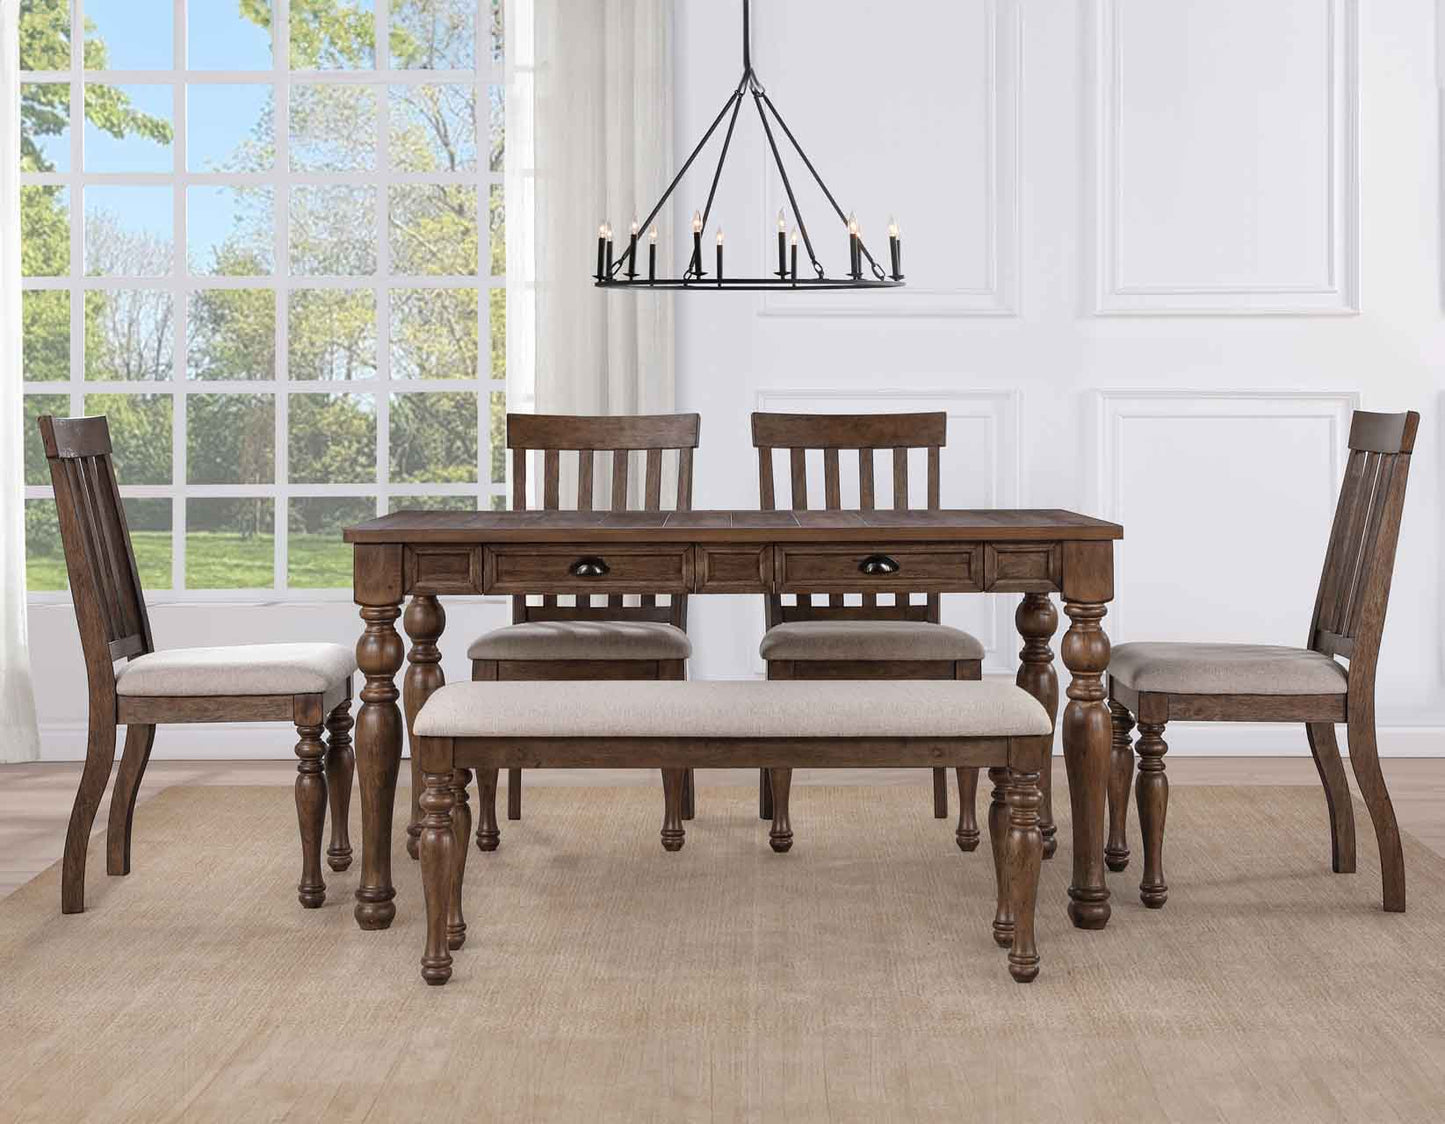 Joanna Brown 4-Drawer Dining Set (table, 4 chairs, & bench) by Steve Silver